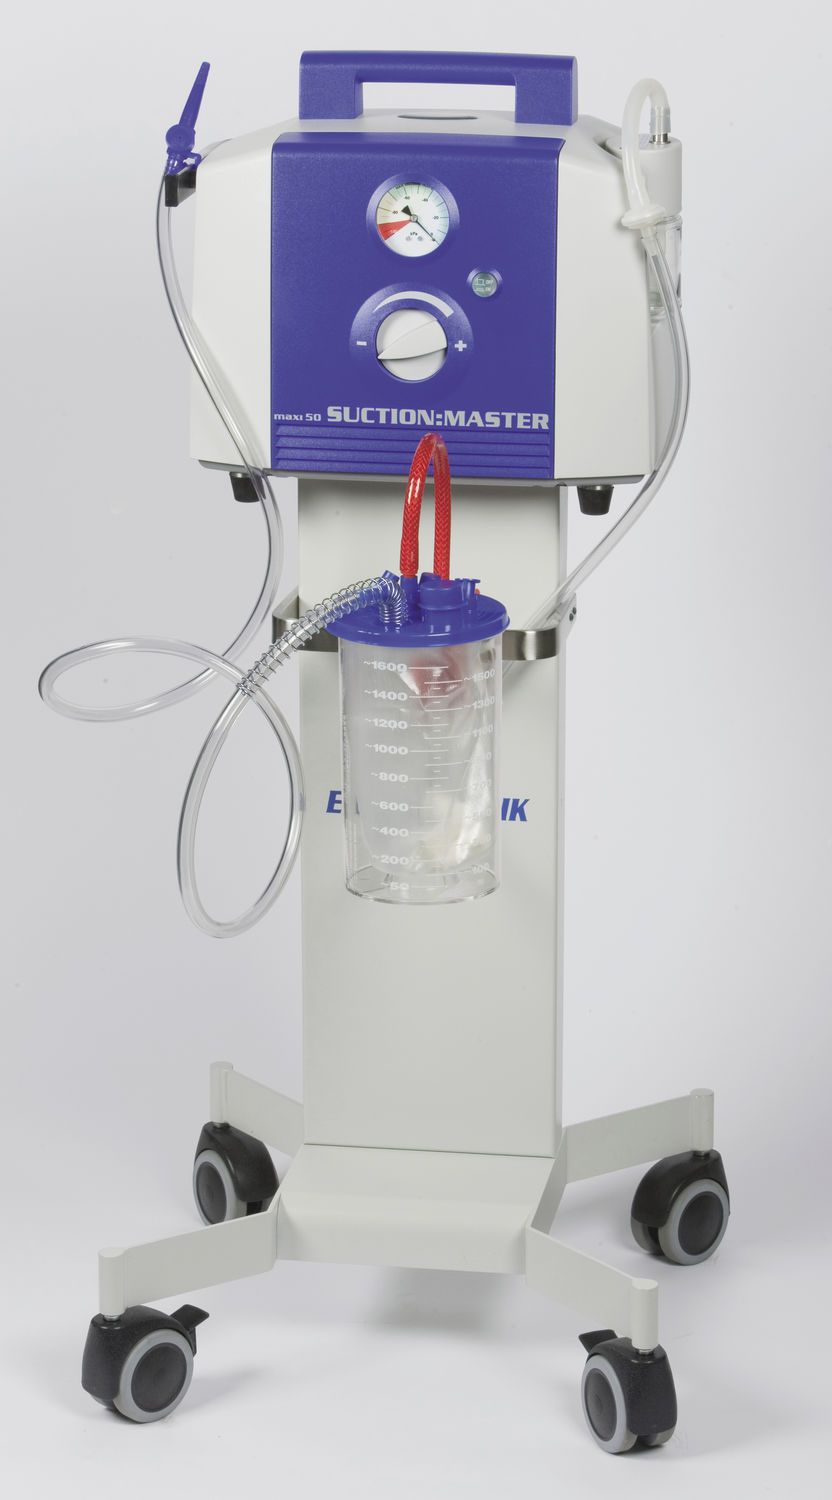 Surgical suction pump / on casters max. 50 L /min | SUCTION:MASTER Endo-Technik